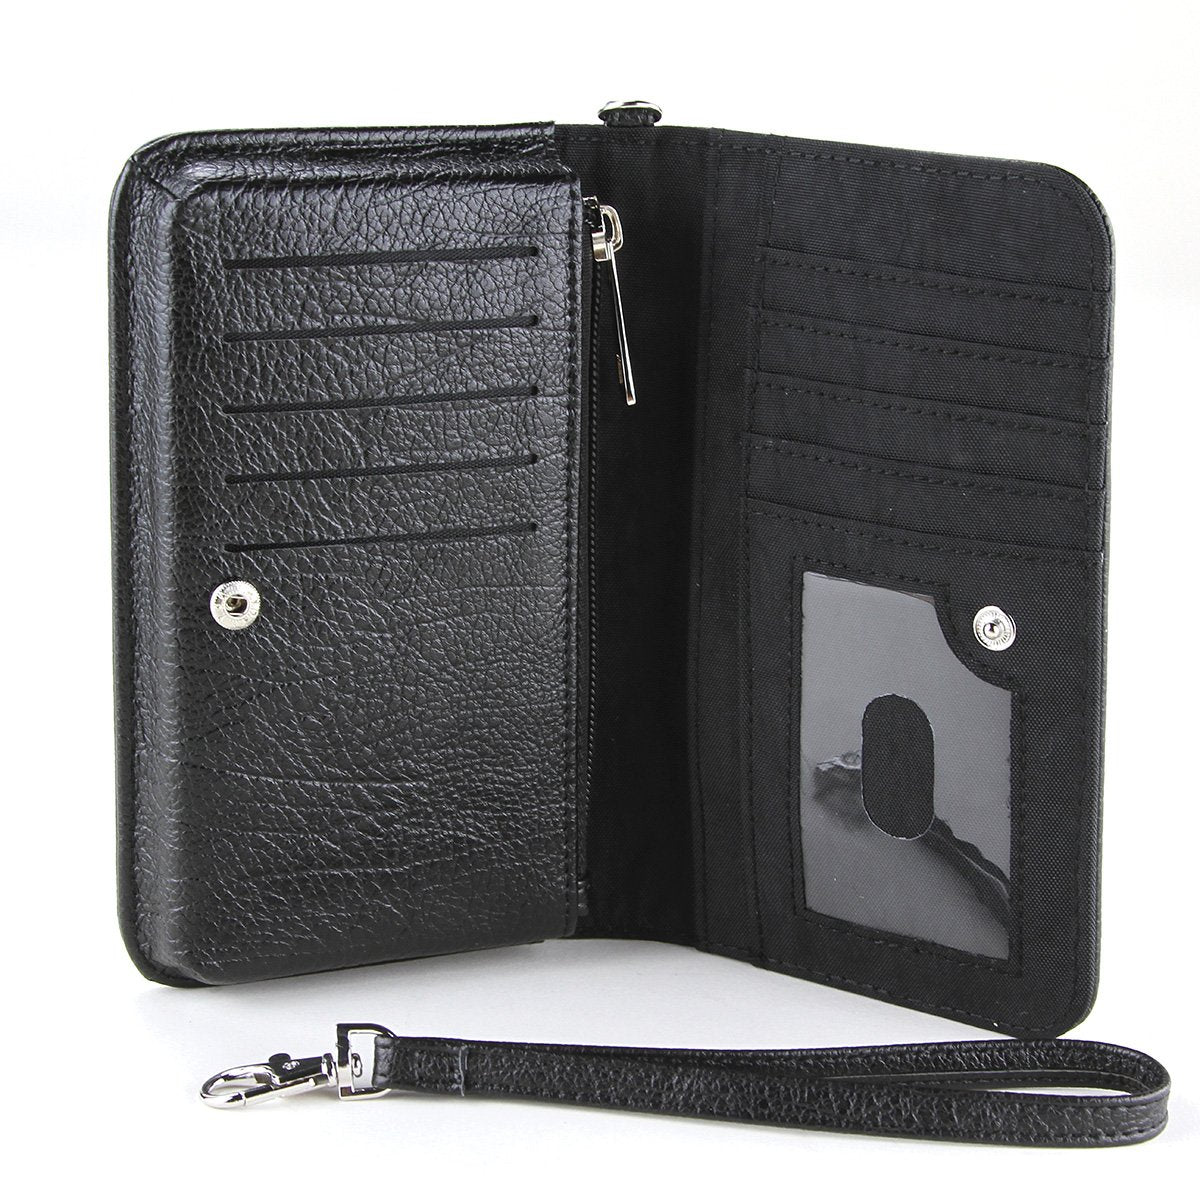 The Witches Companion Book Wallet With Wrist Strap